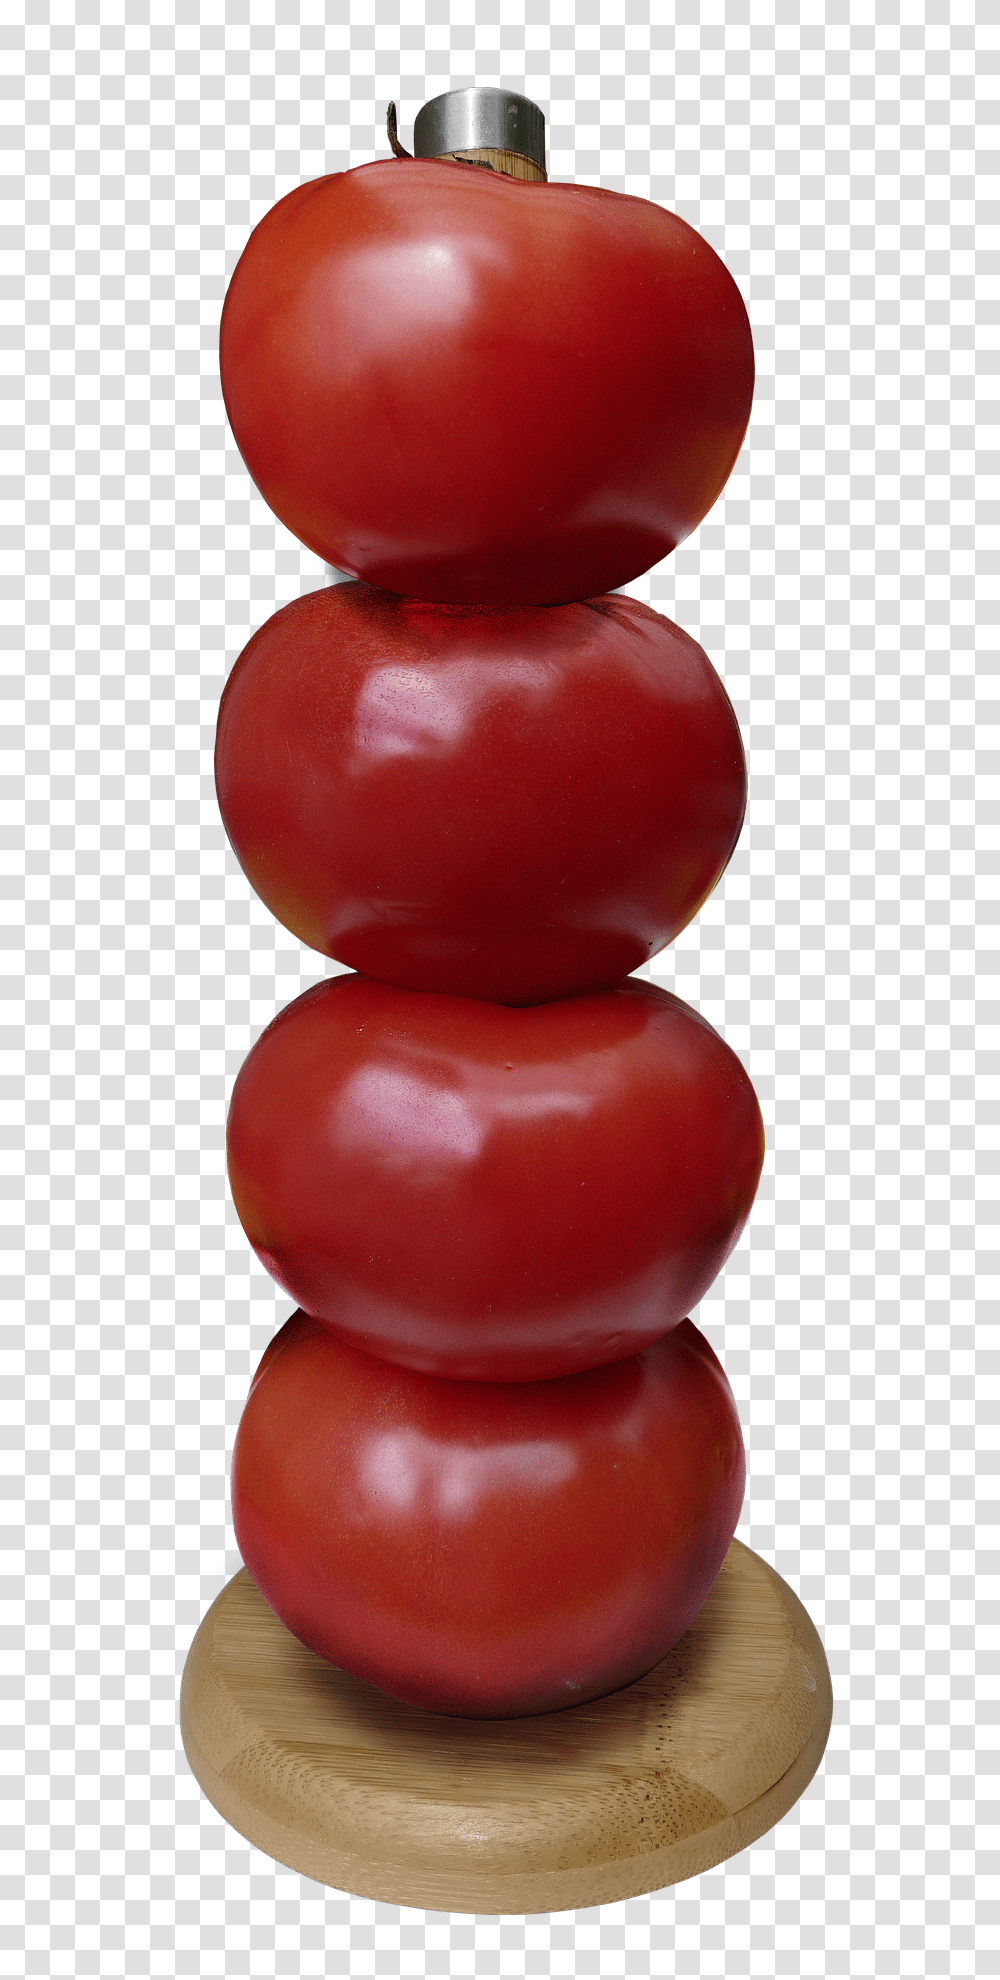 Tomato Stand Vegetable, Plant, Fruit, Food Transparent Png